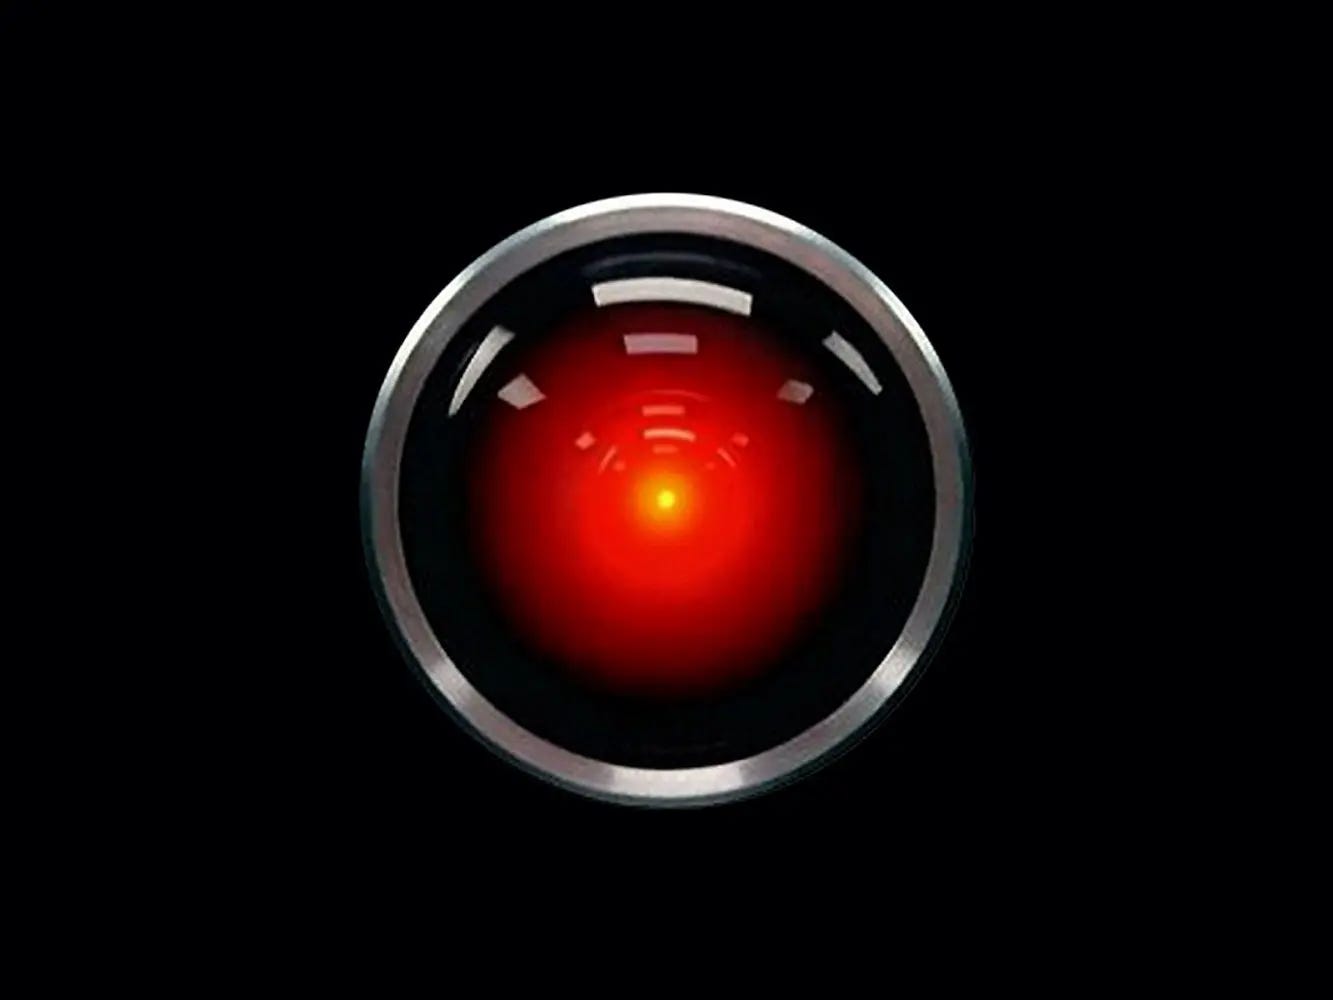 The ominous red light of the everwatching HAL 9000